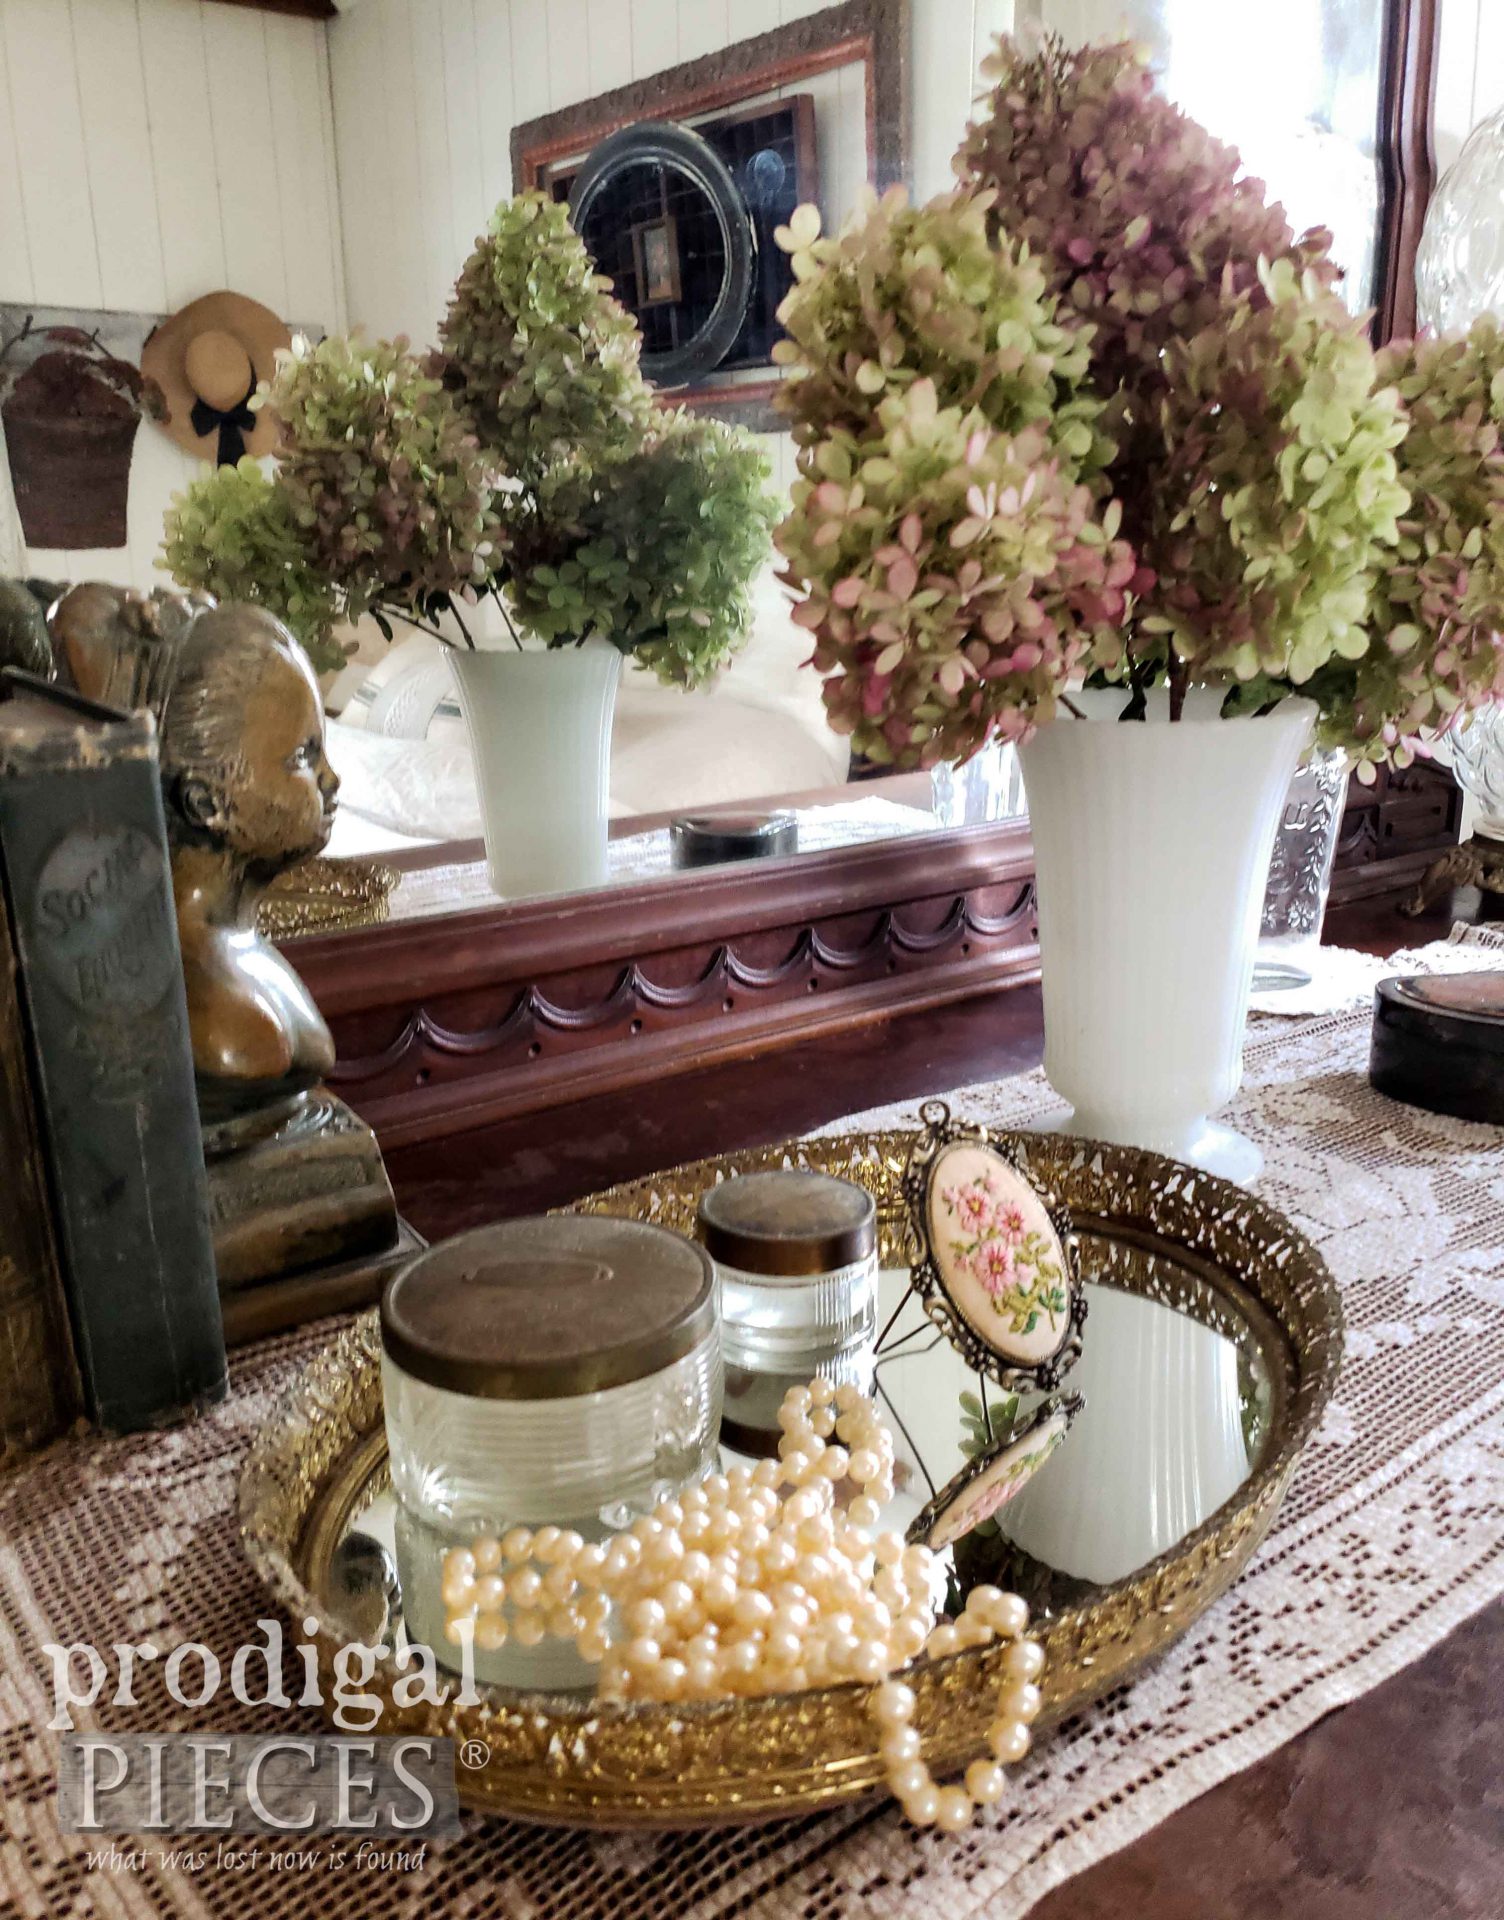 Vintage Bedroom Dresser decked out for autumn by Larissa of Prodigal Pieces | prodigalpieces.com #prodigalpieces #diy #home #homedecor #bedroom